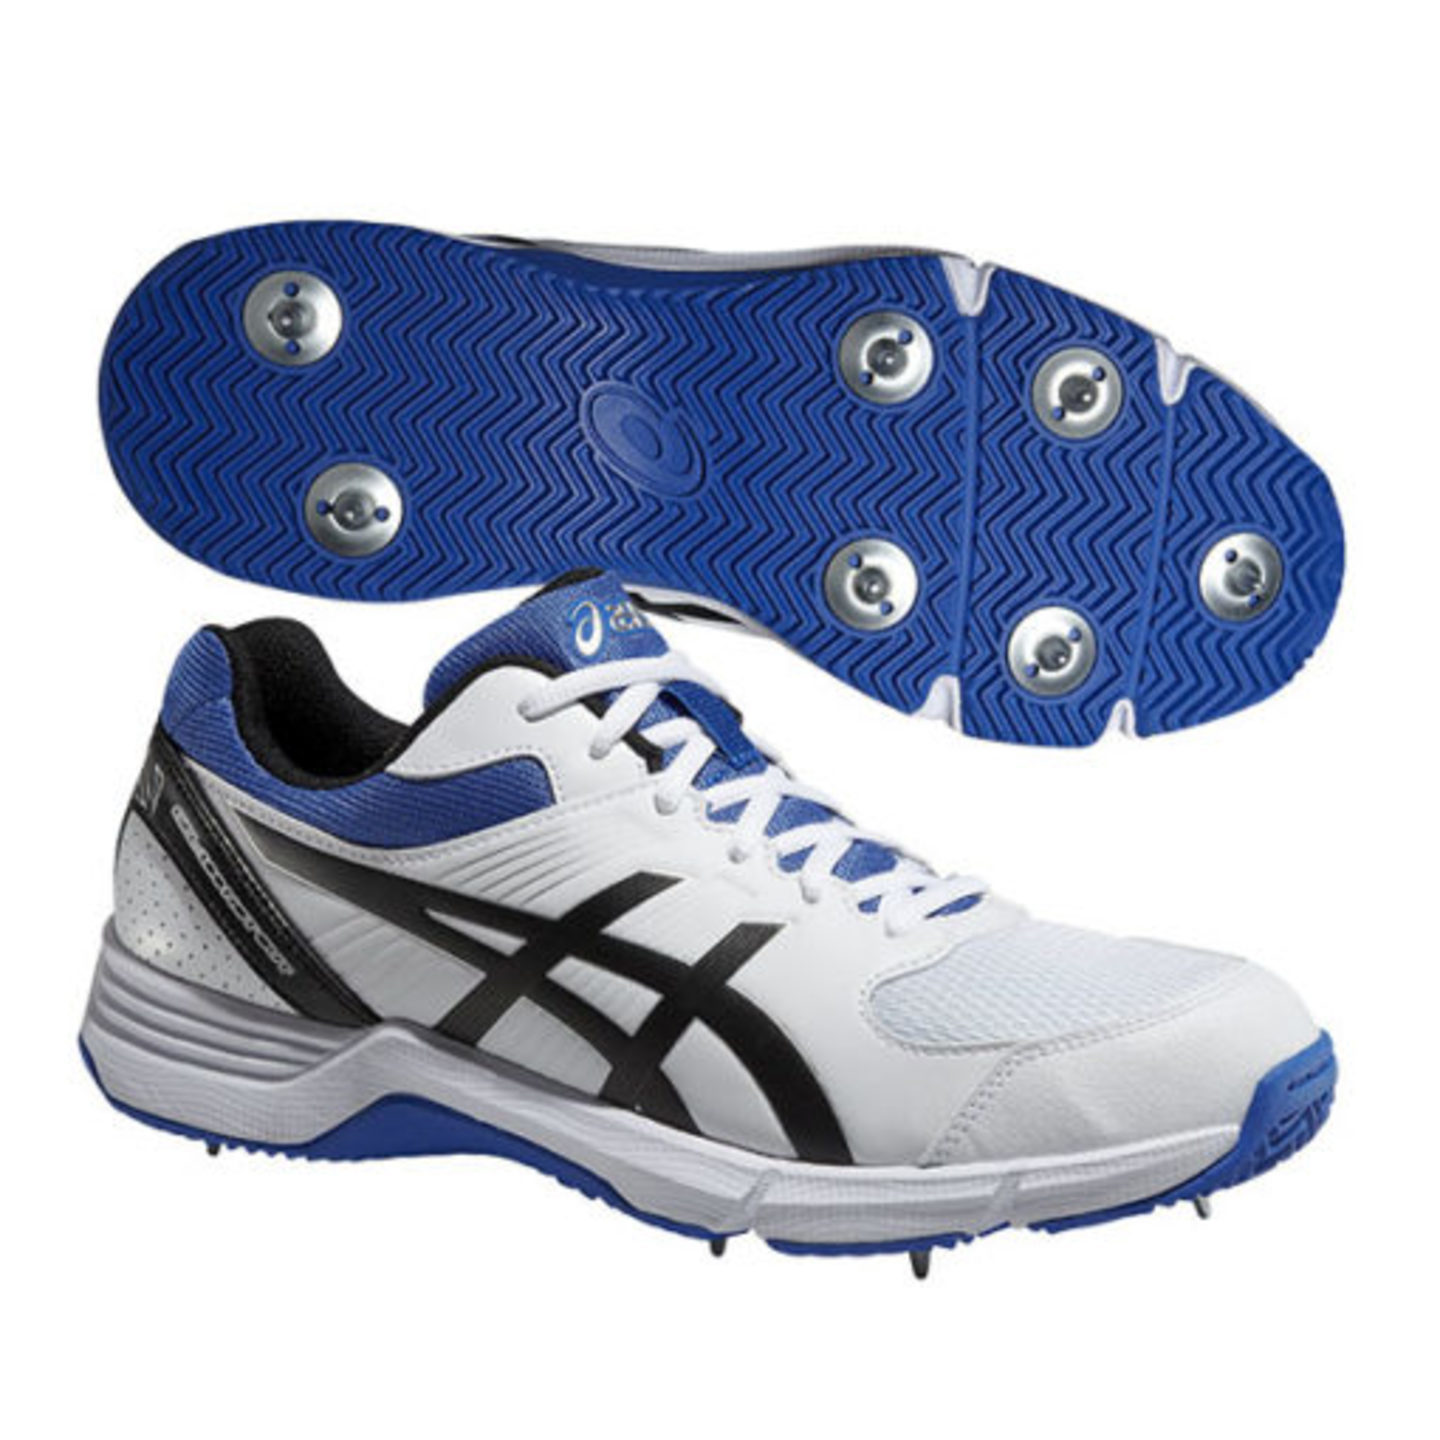 ASICS GEL-100 NOT OUT CRICKET SPIKE SHOES